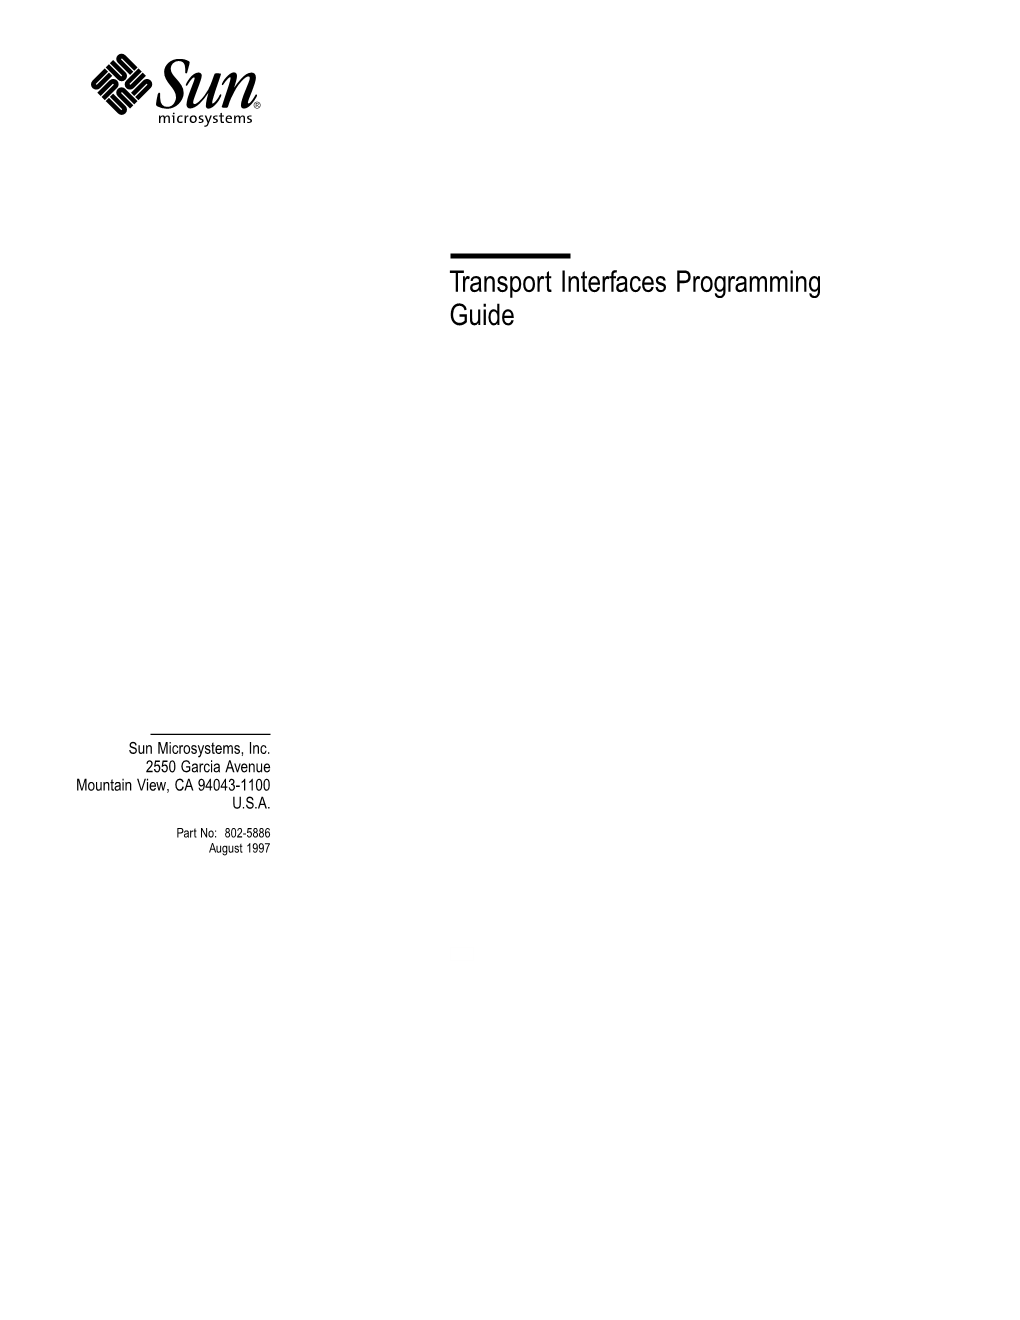 Transport Interfaces Programming Guide